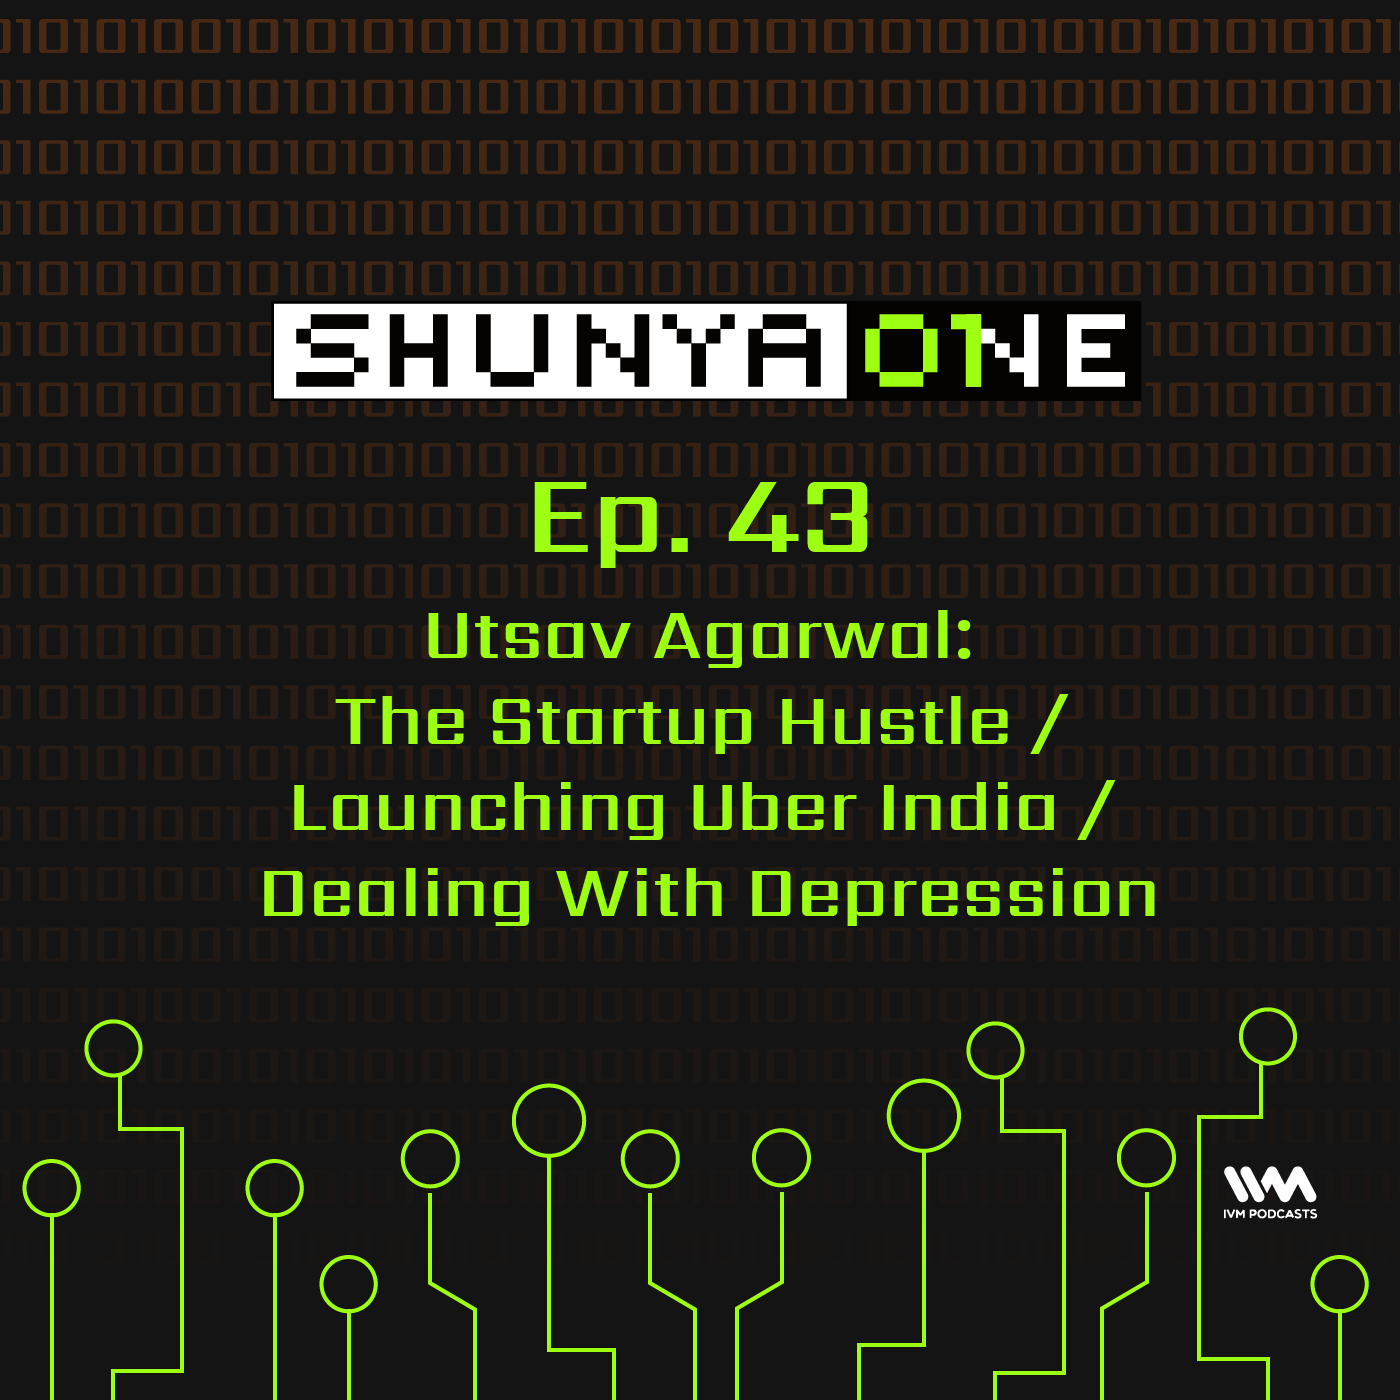 Feat. Utsav Agarwal: The Startup Hustle / Launching Uber India / Dealing With Depression